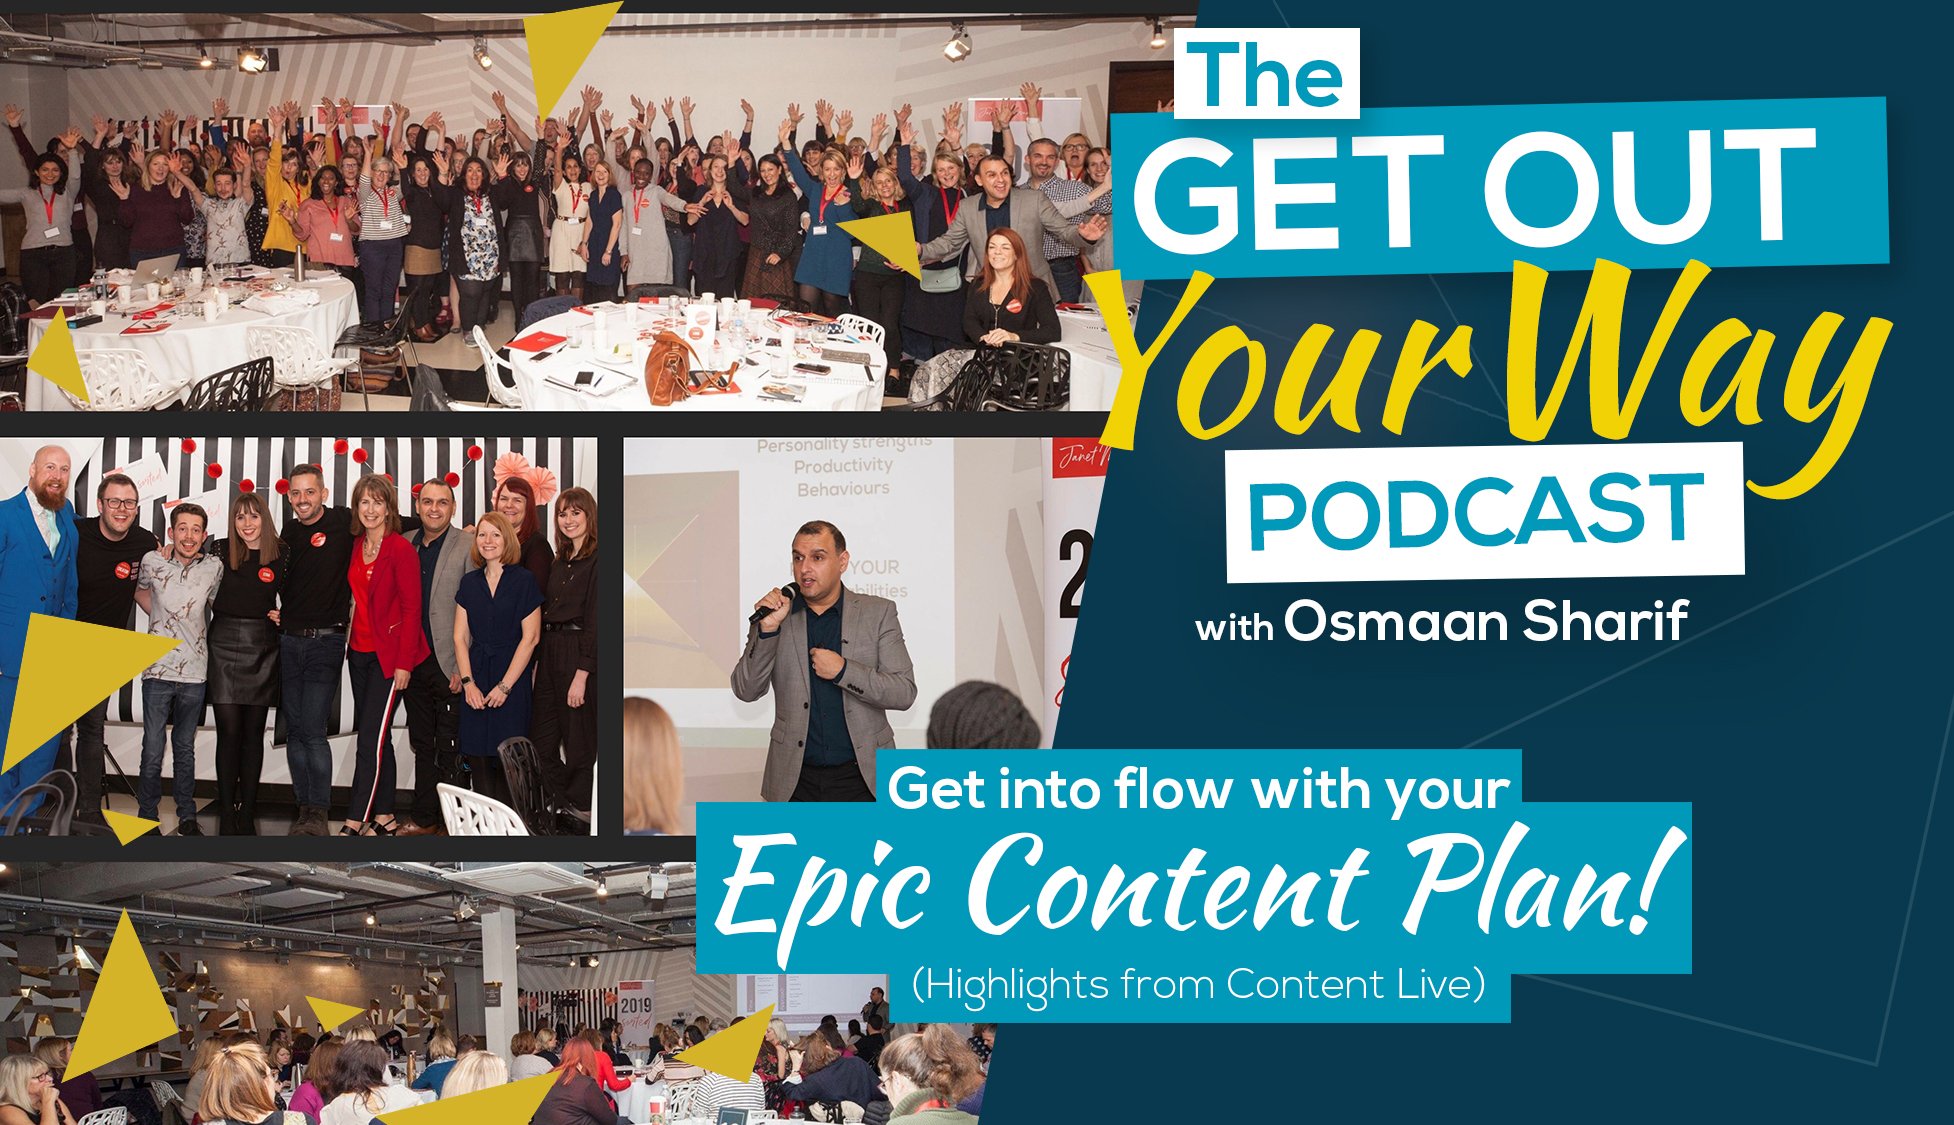 Get into flow with your epic content plan